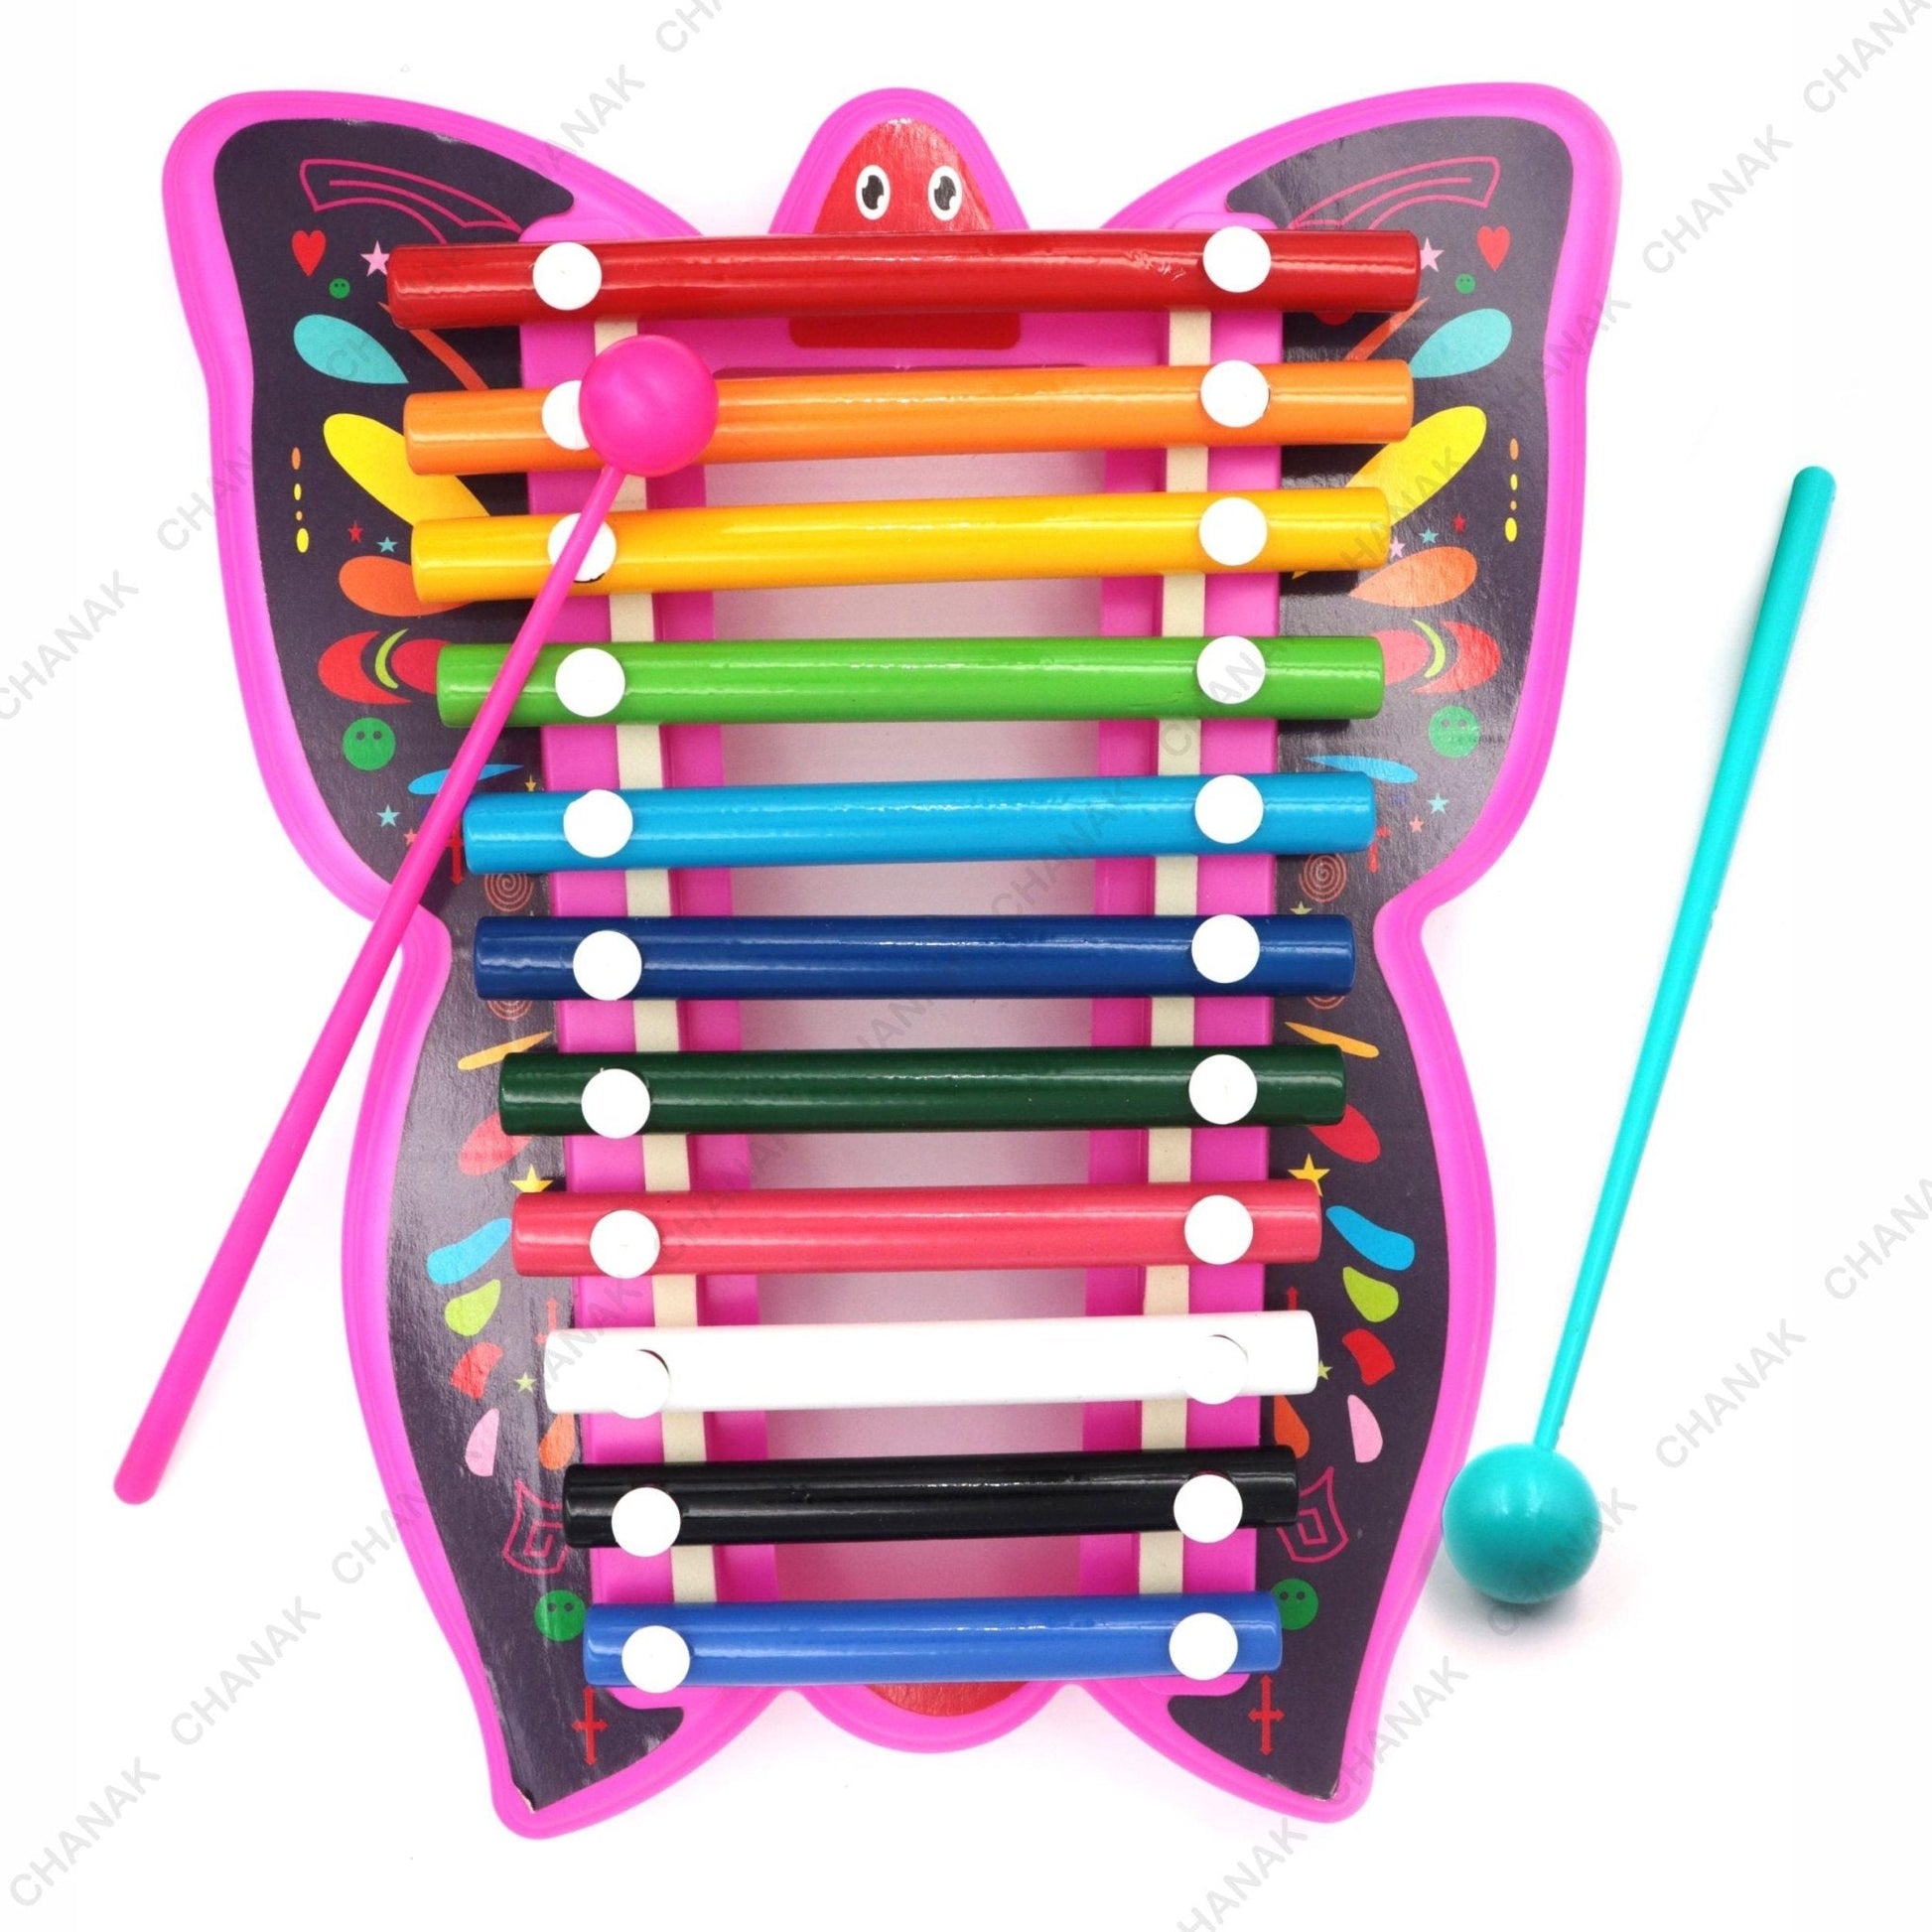 Chanak Musical Butterfly Xylophone Toy (Pink) - chanak